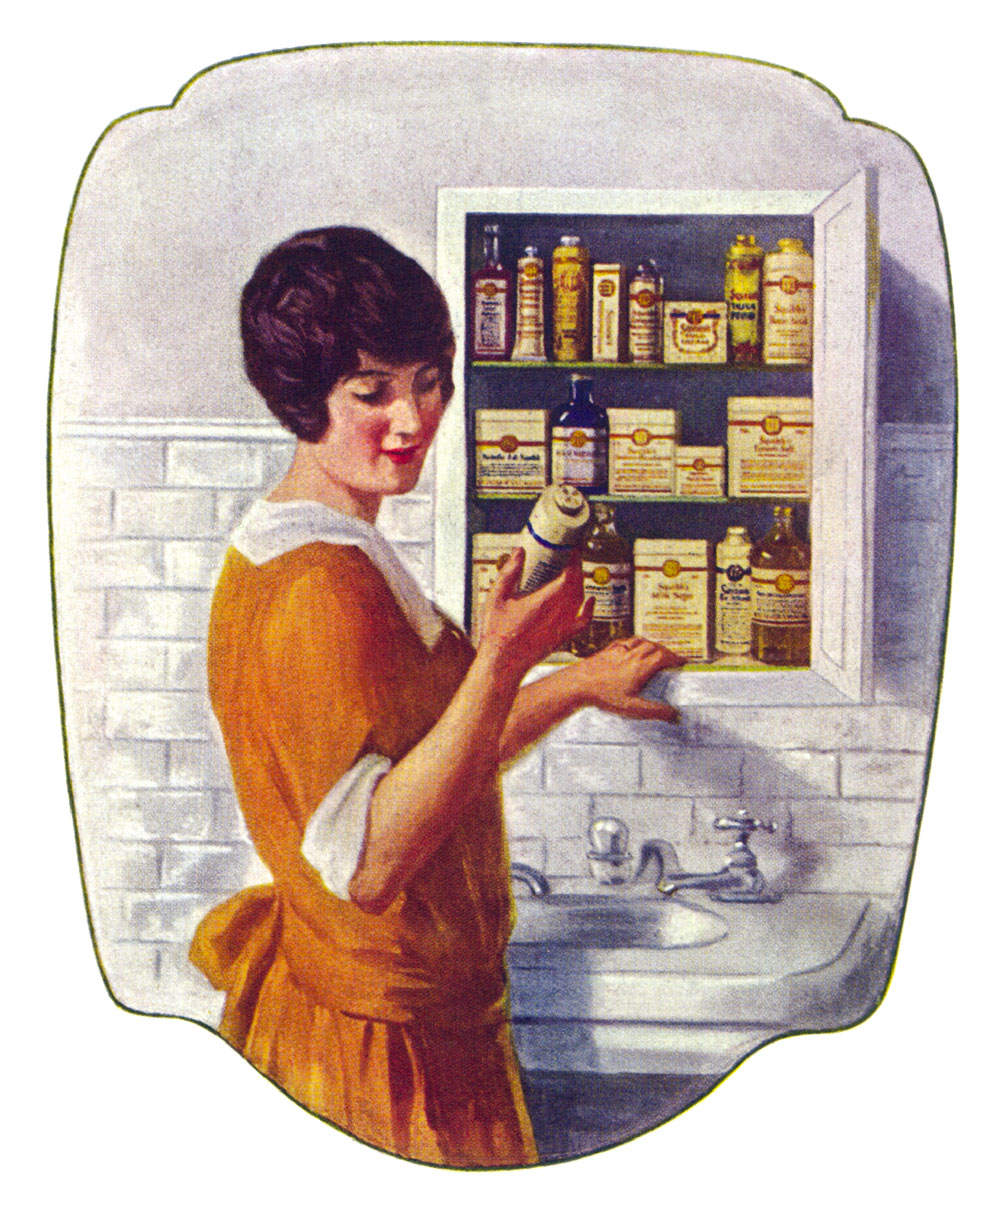 An illustration of a woman in front of an open medicine cabinet, from a nineteen twenty three advertisement of Squibb’s medical and hygiene products.